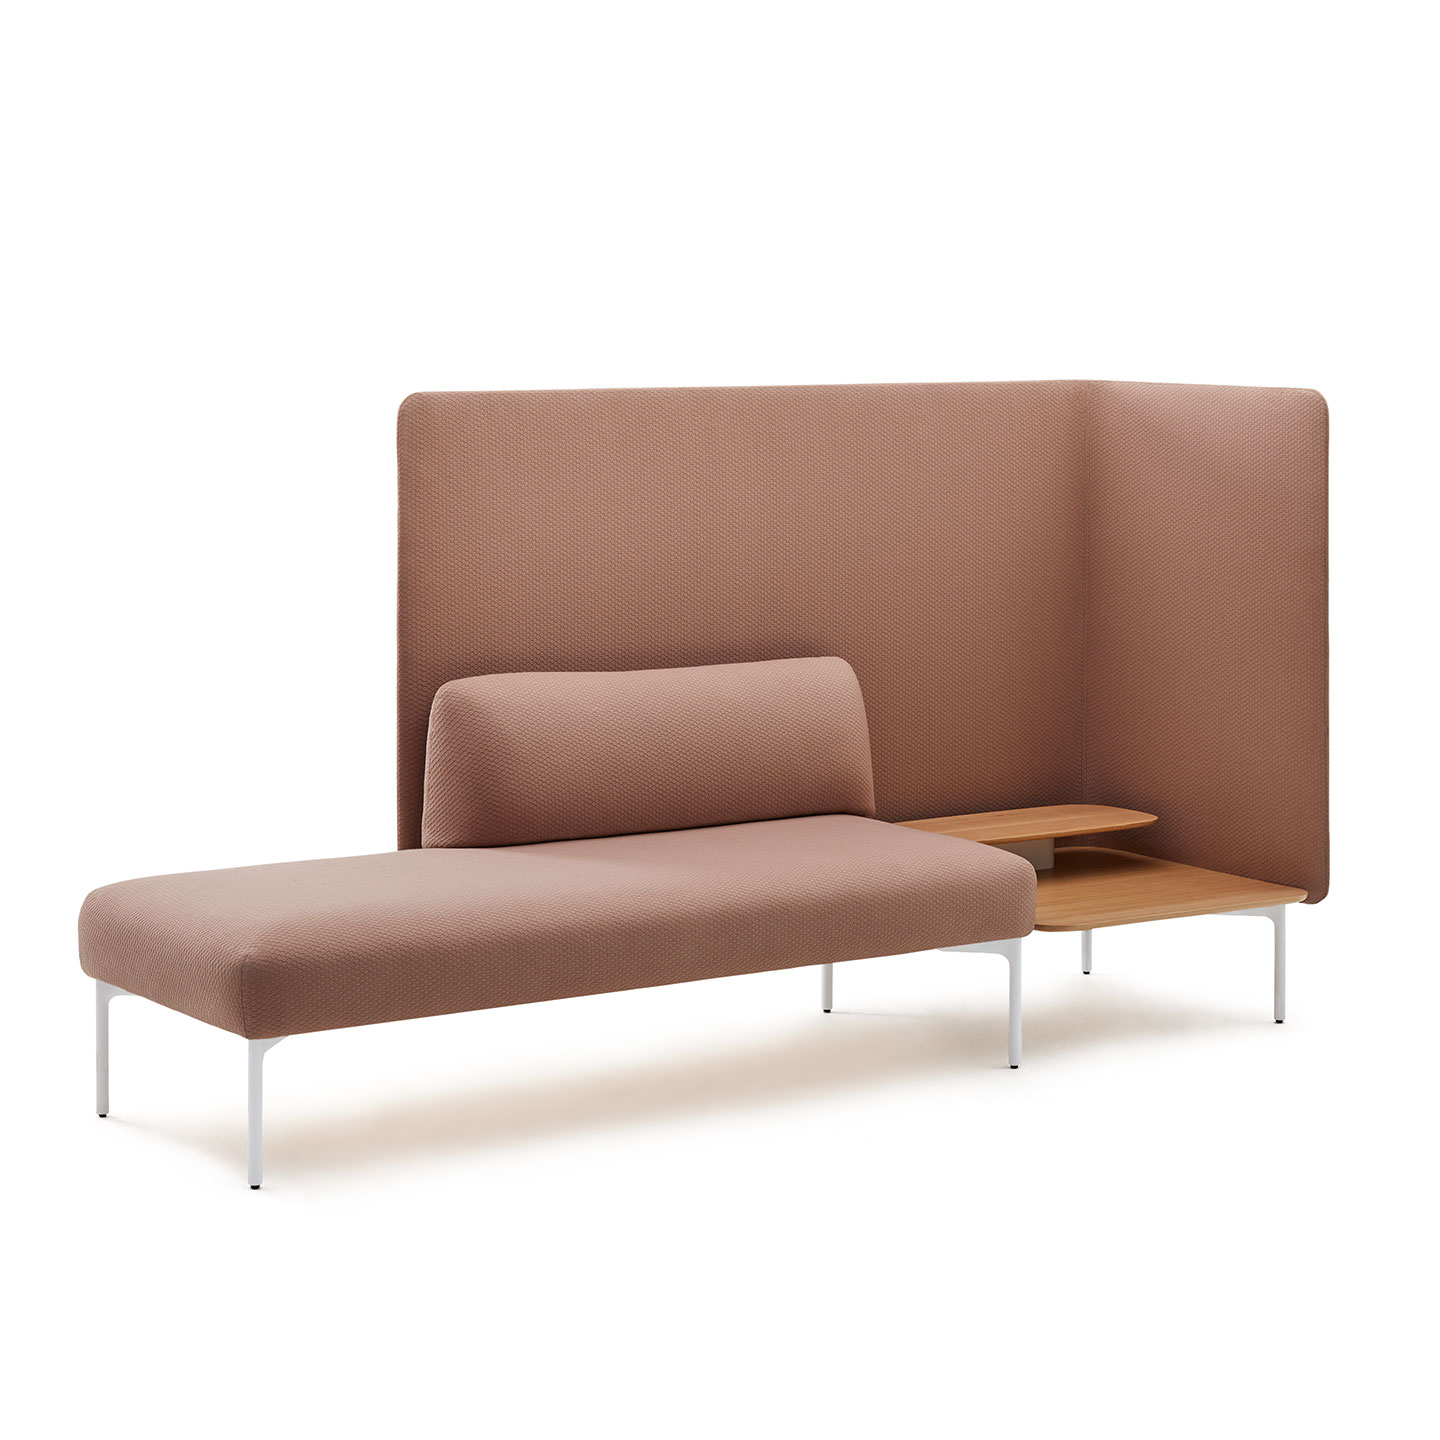 Haworth Cabana Lounge in tan connecting to small side table with booth around it